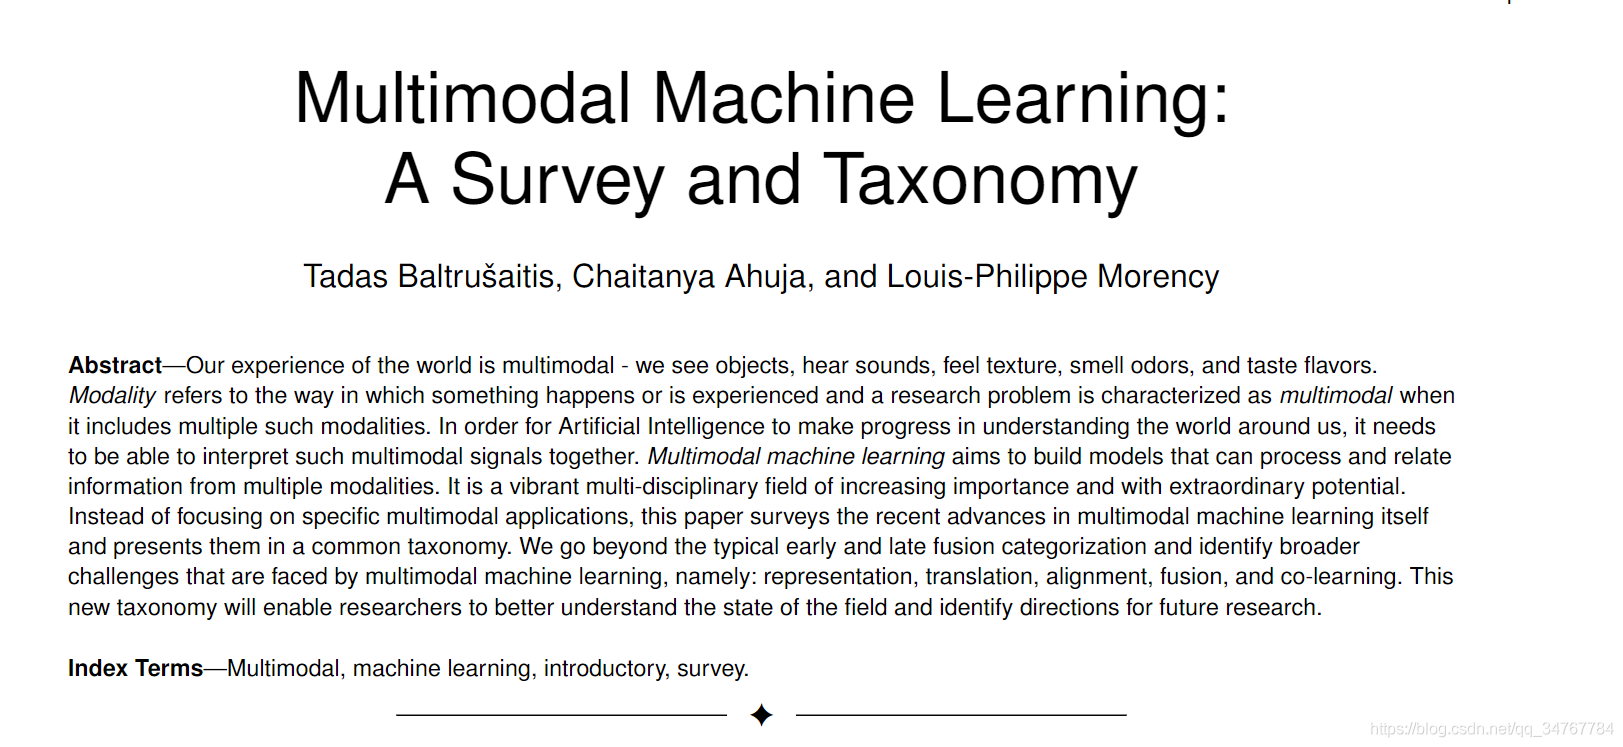 Multimodal Machine Learning: A Survey and Taxonomy